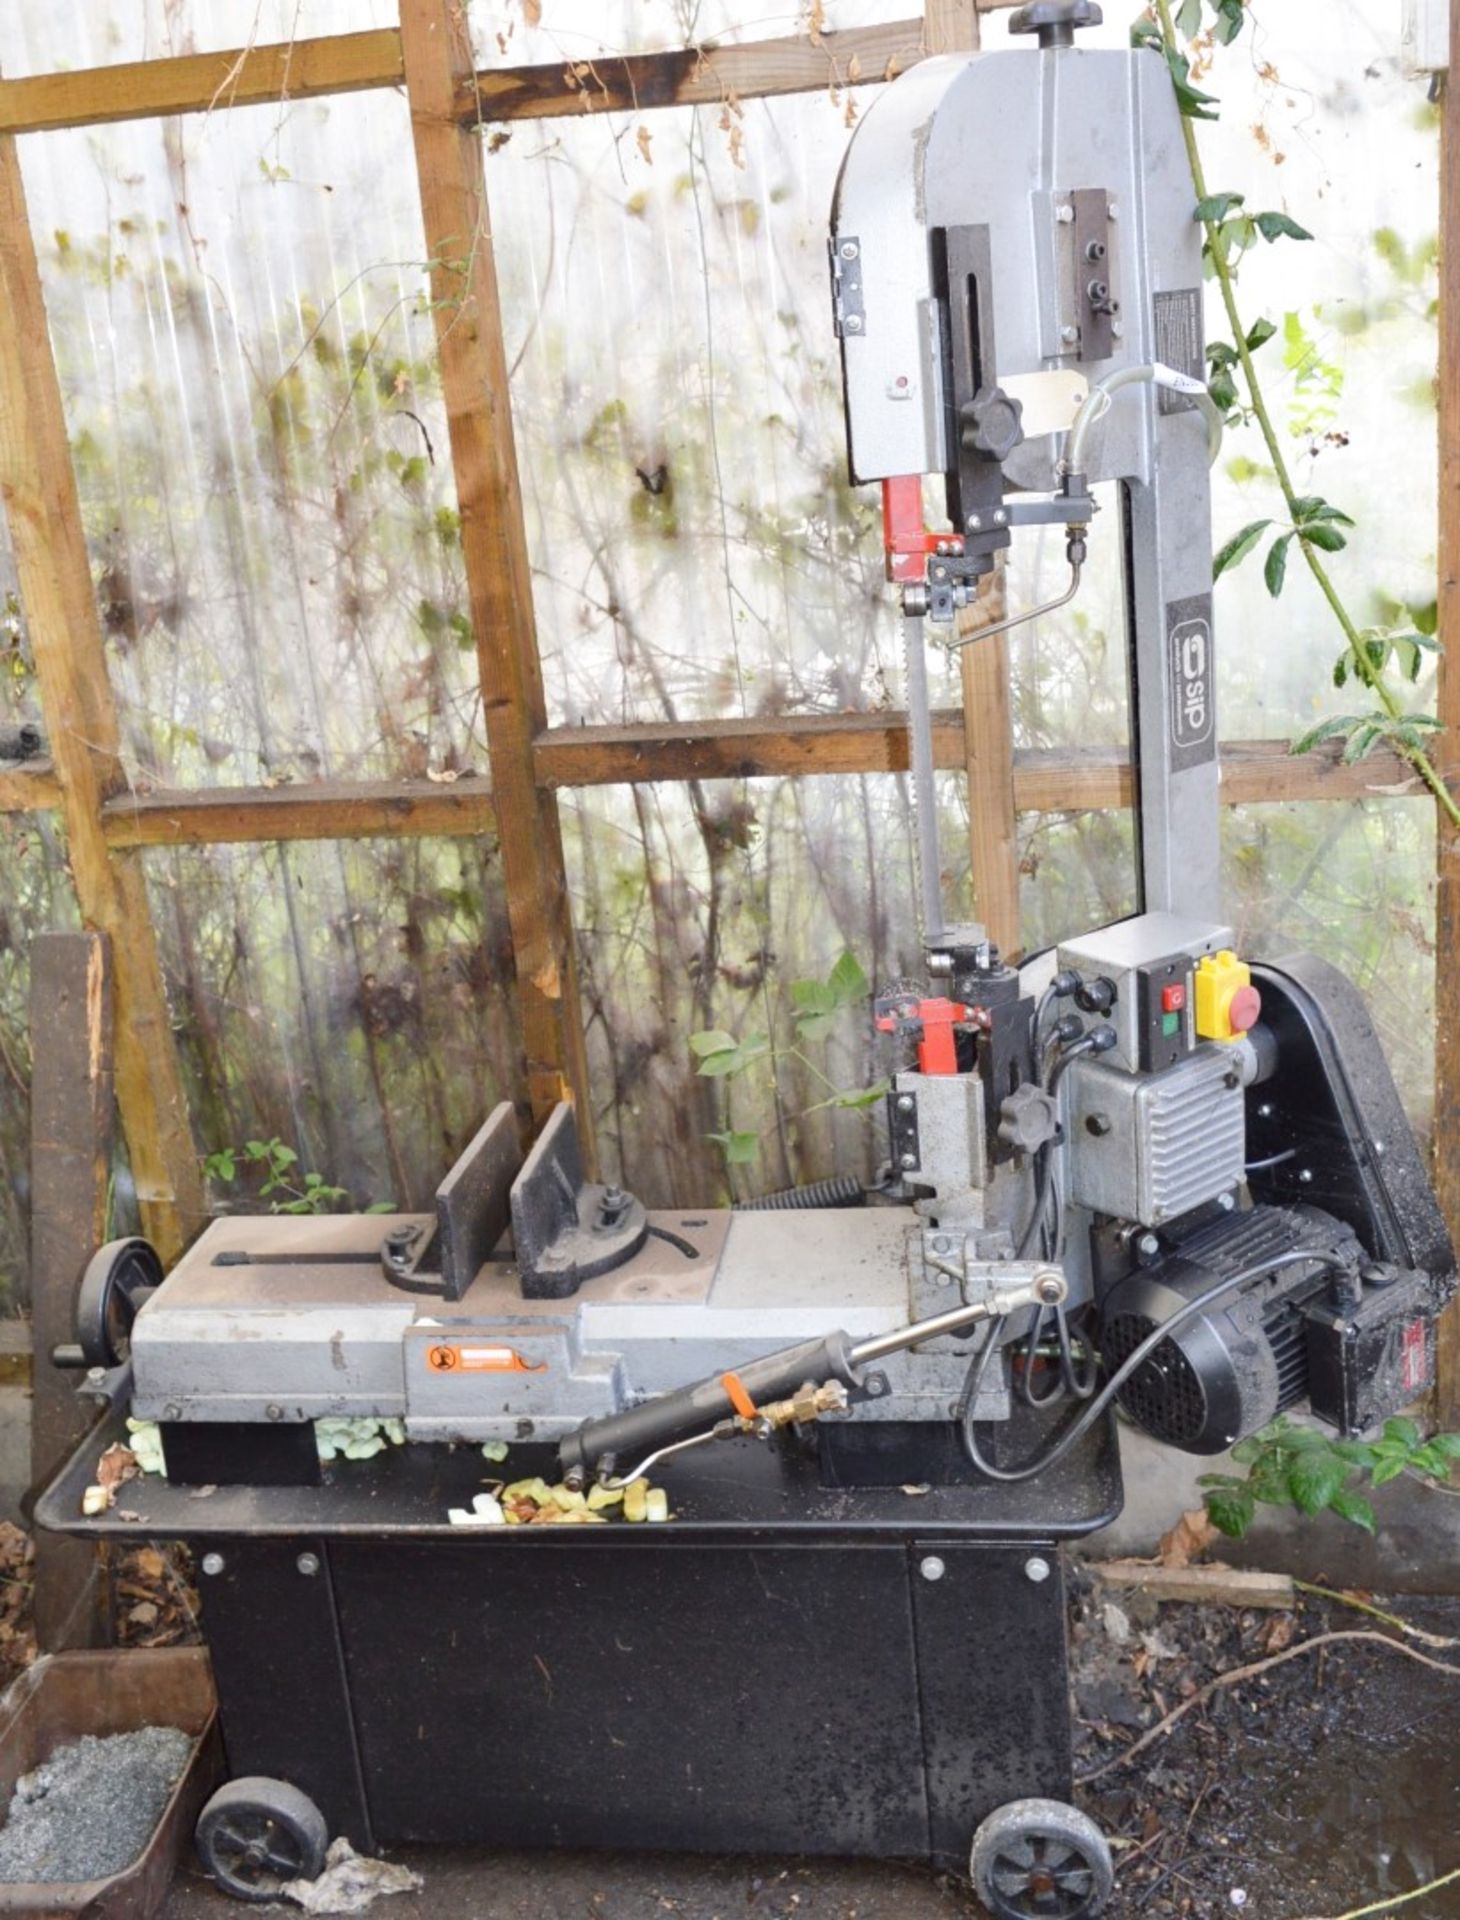 1 x Sip Trade Metal Cutting Band Saw - 12" X 7" - CL202 - Ref EN168 - Location: Worcester WR14 - Image 3 of 4